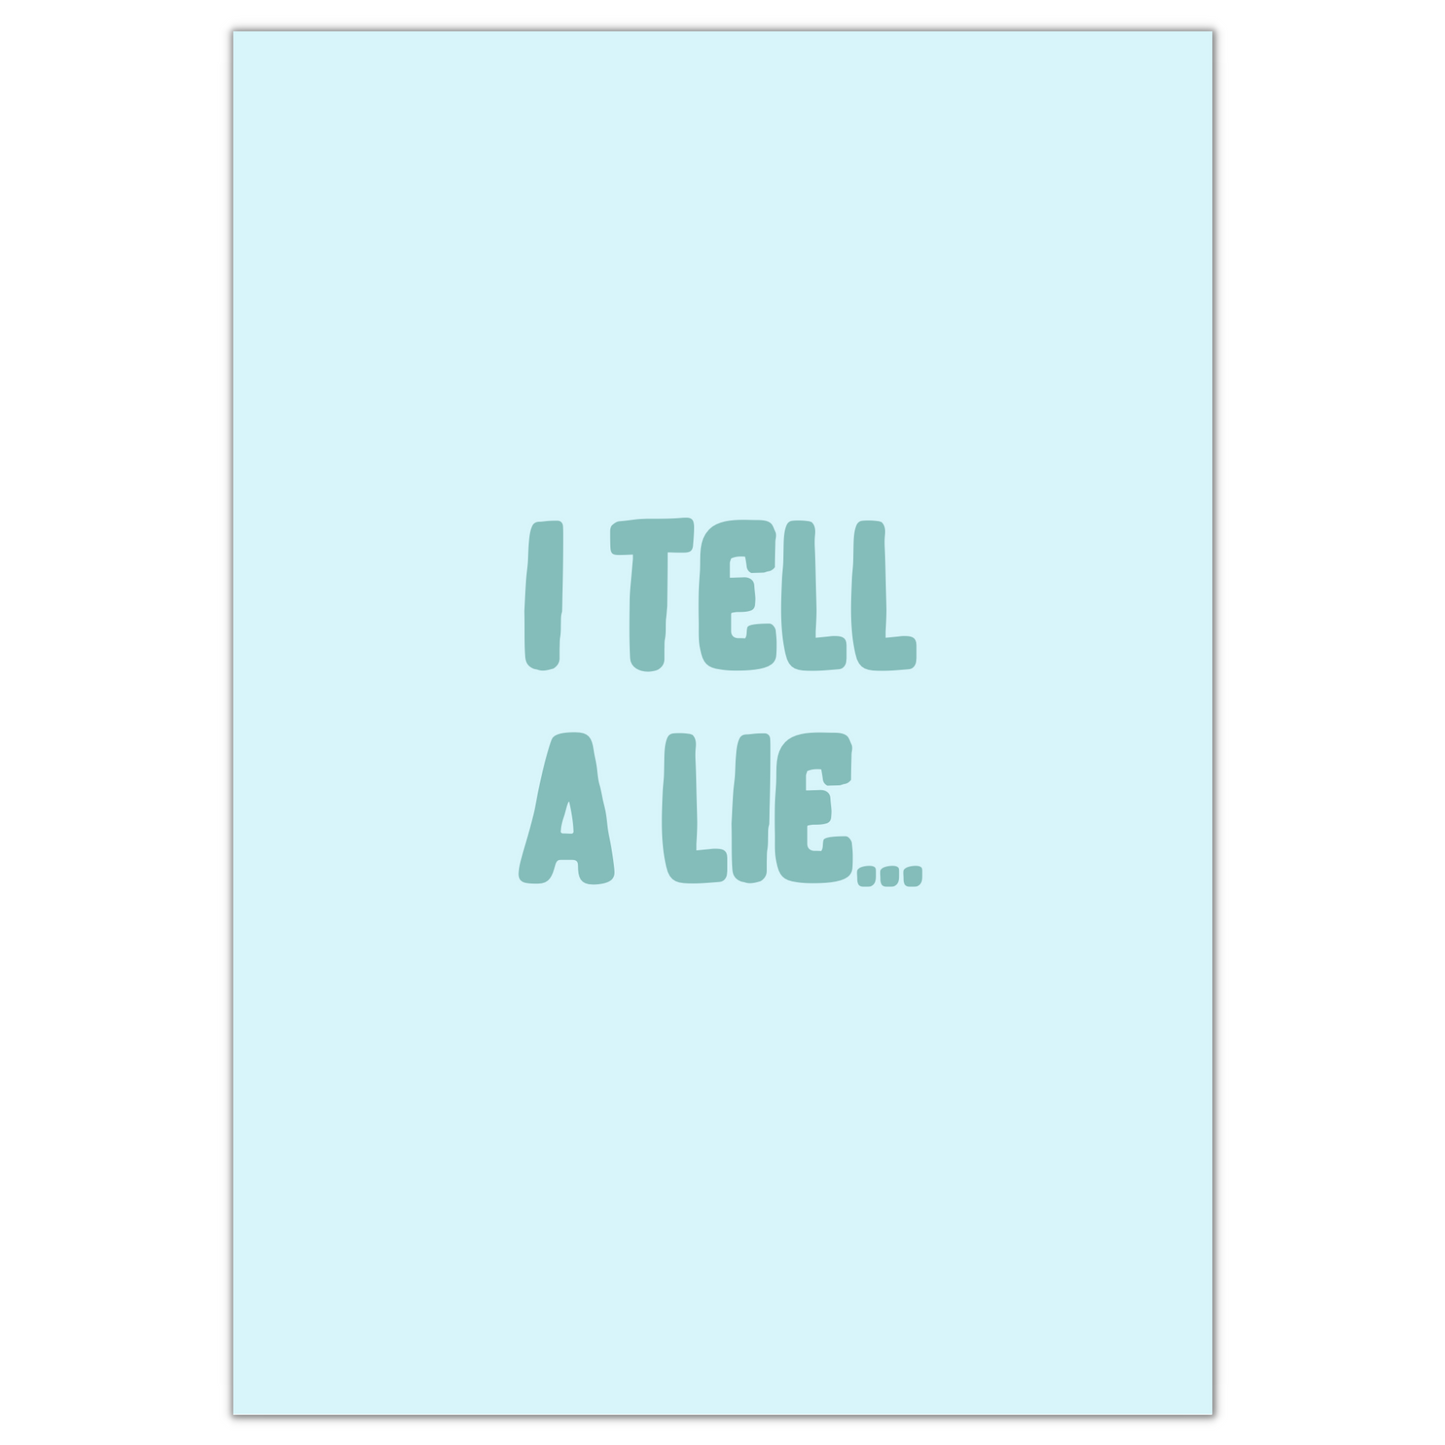 I TELL A LIE PRINT- NOW £4.80 AT CHECKOUT